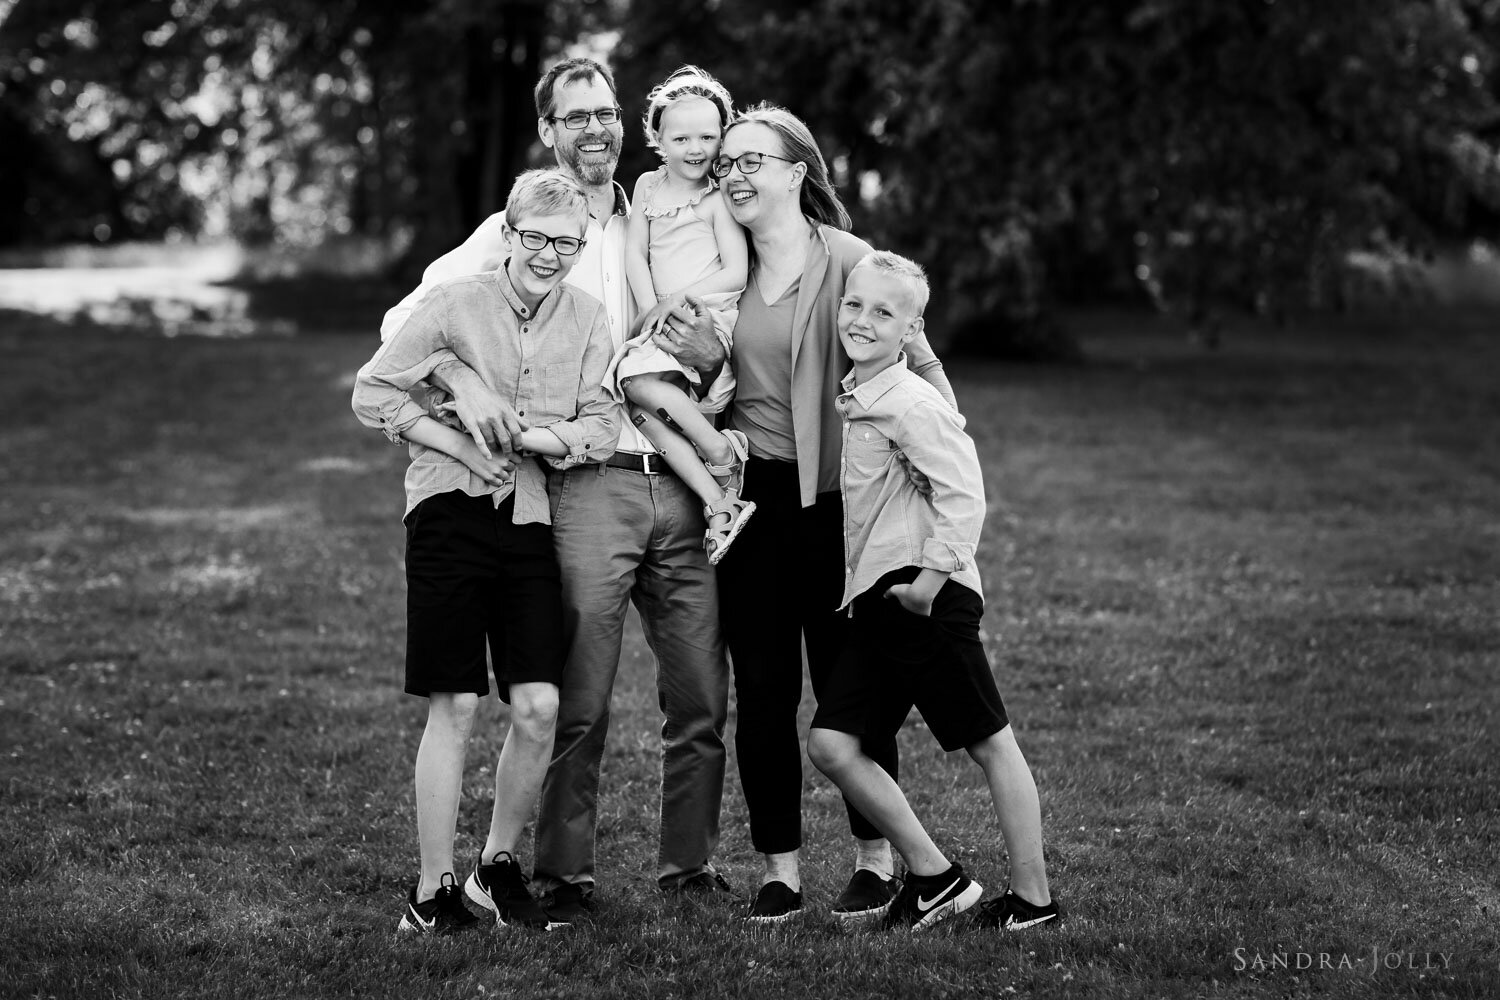 fun-family-photo-session-in-stockholm-by-sandra-jolly-photography.jpg